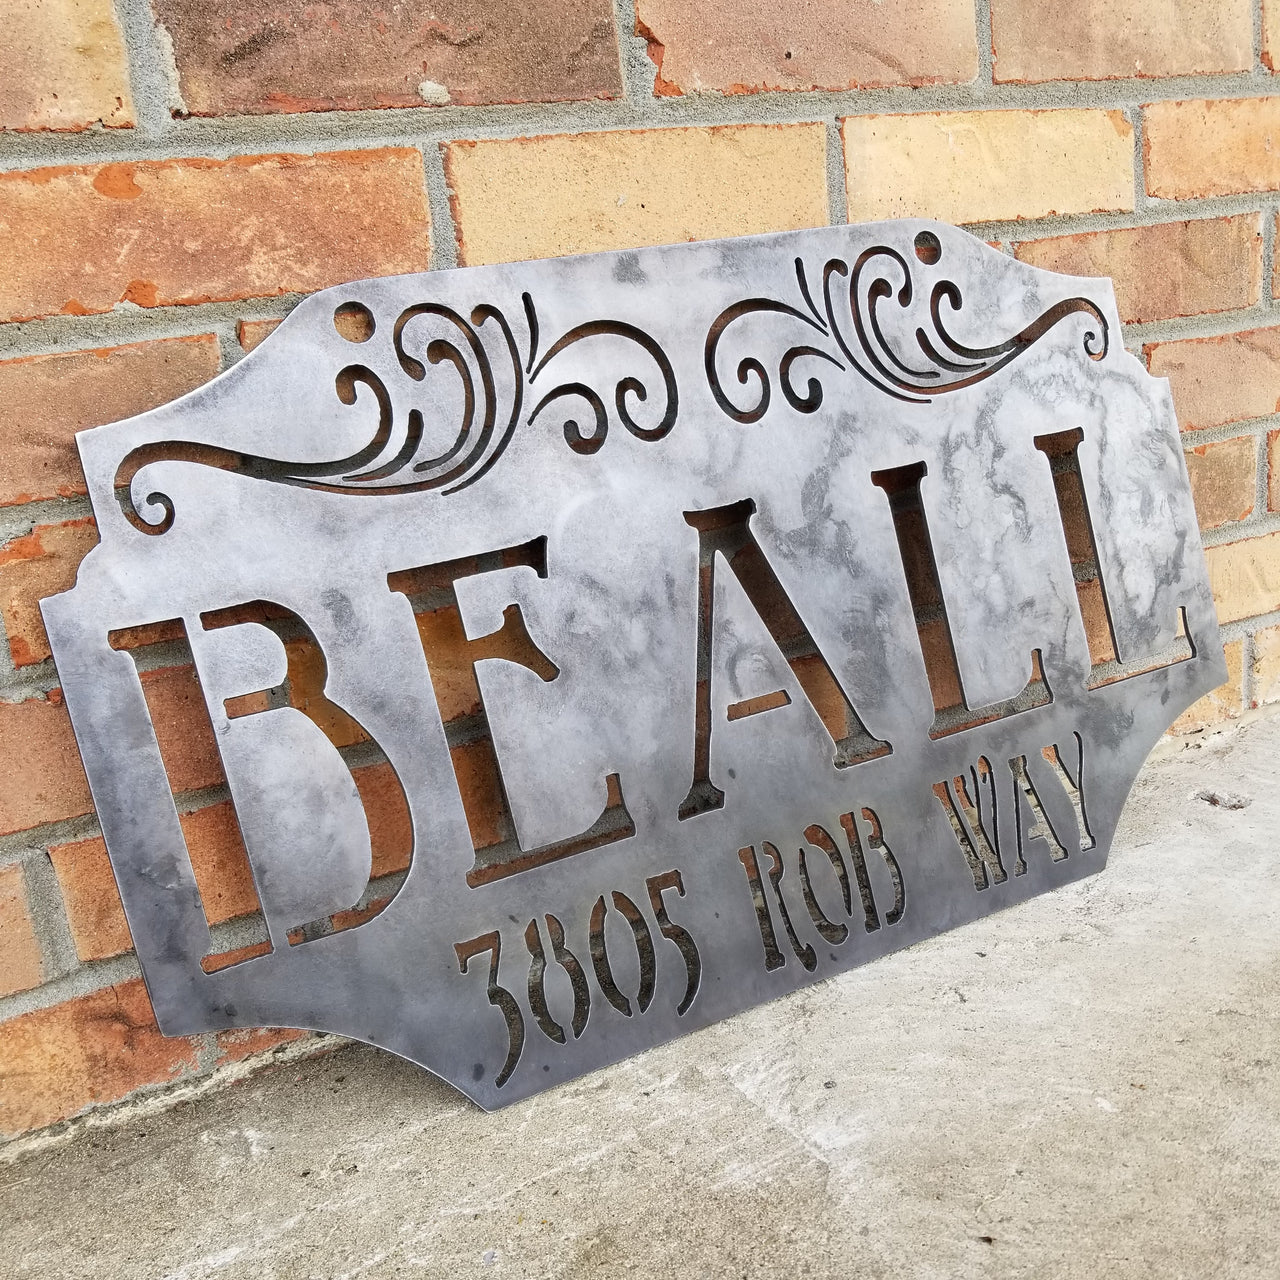 This custom metal address sign is raw steel and reads, "Beall 385 Rob Way"